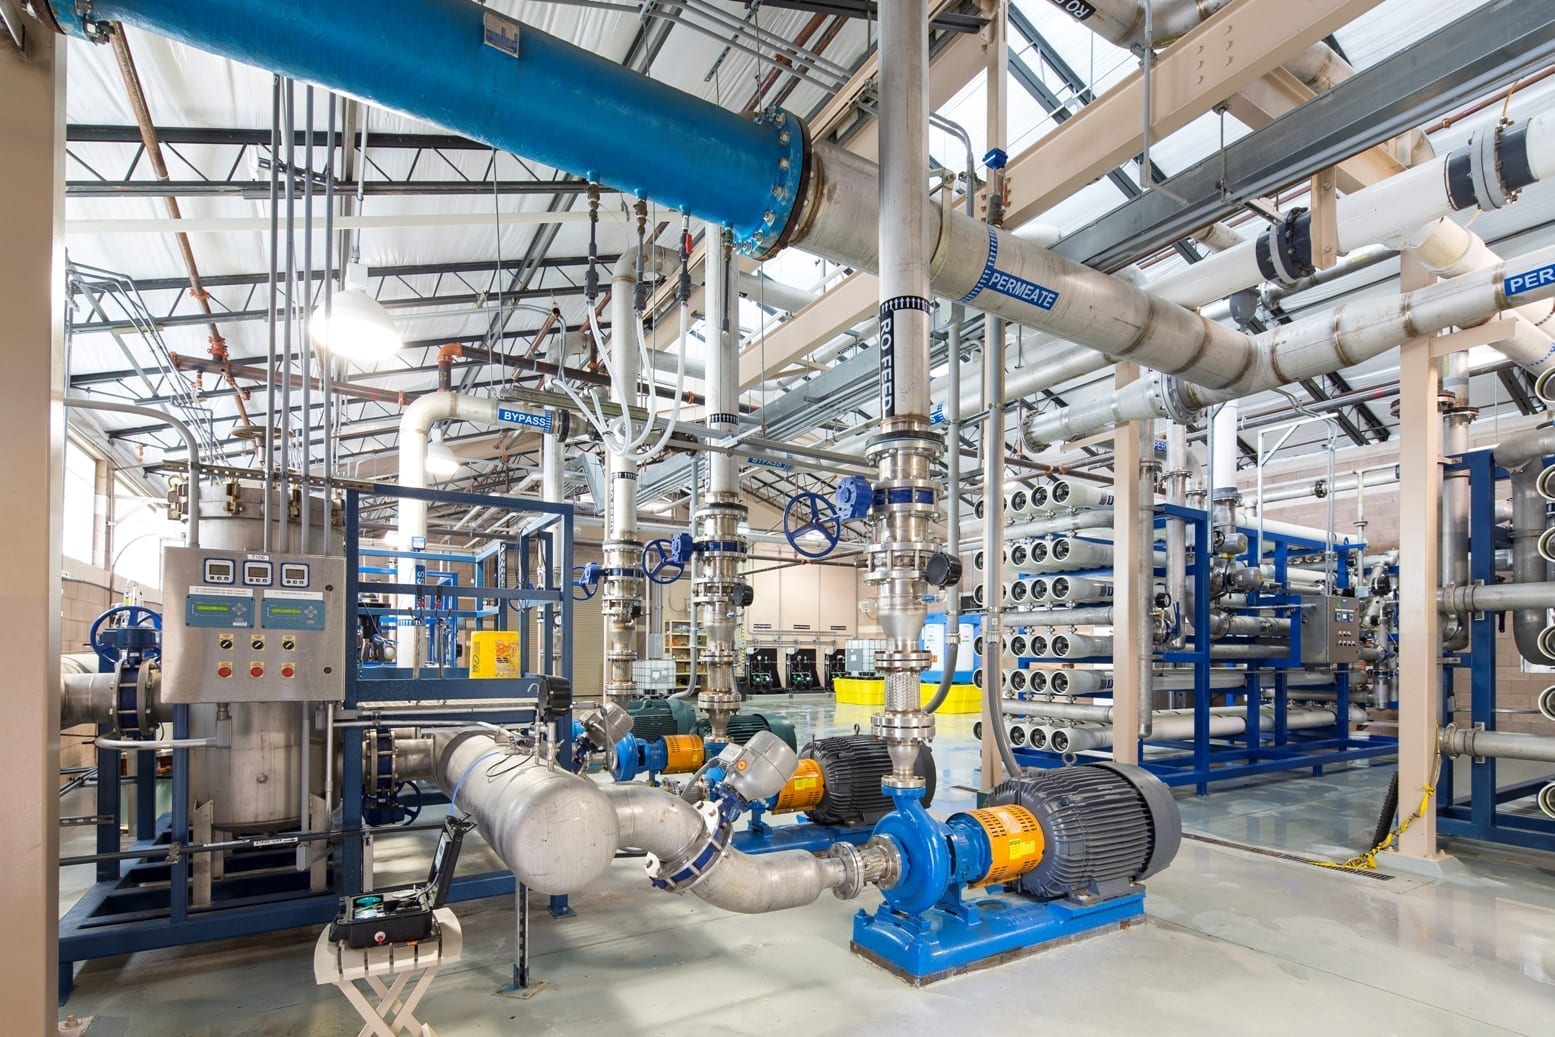 Interior of the PSD’s Reverse Osmosis Drinking Water Treatment Facility on Jenkins Island, which produces 4 million gallons a day of high-quality drinking water.